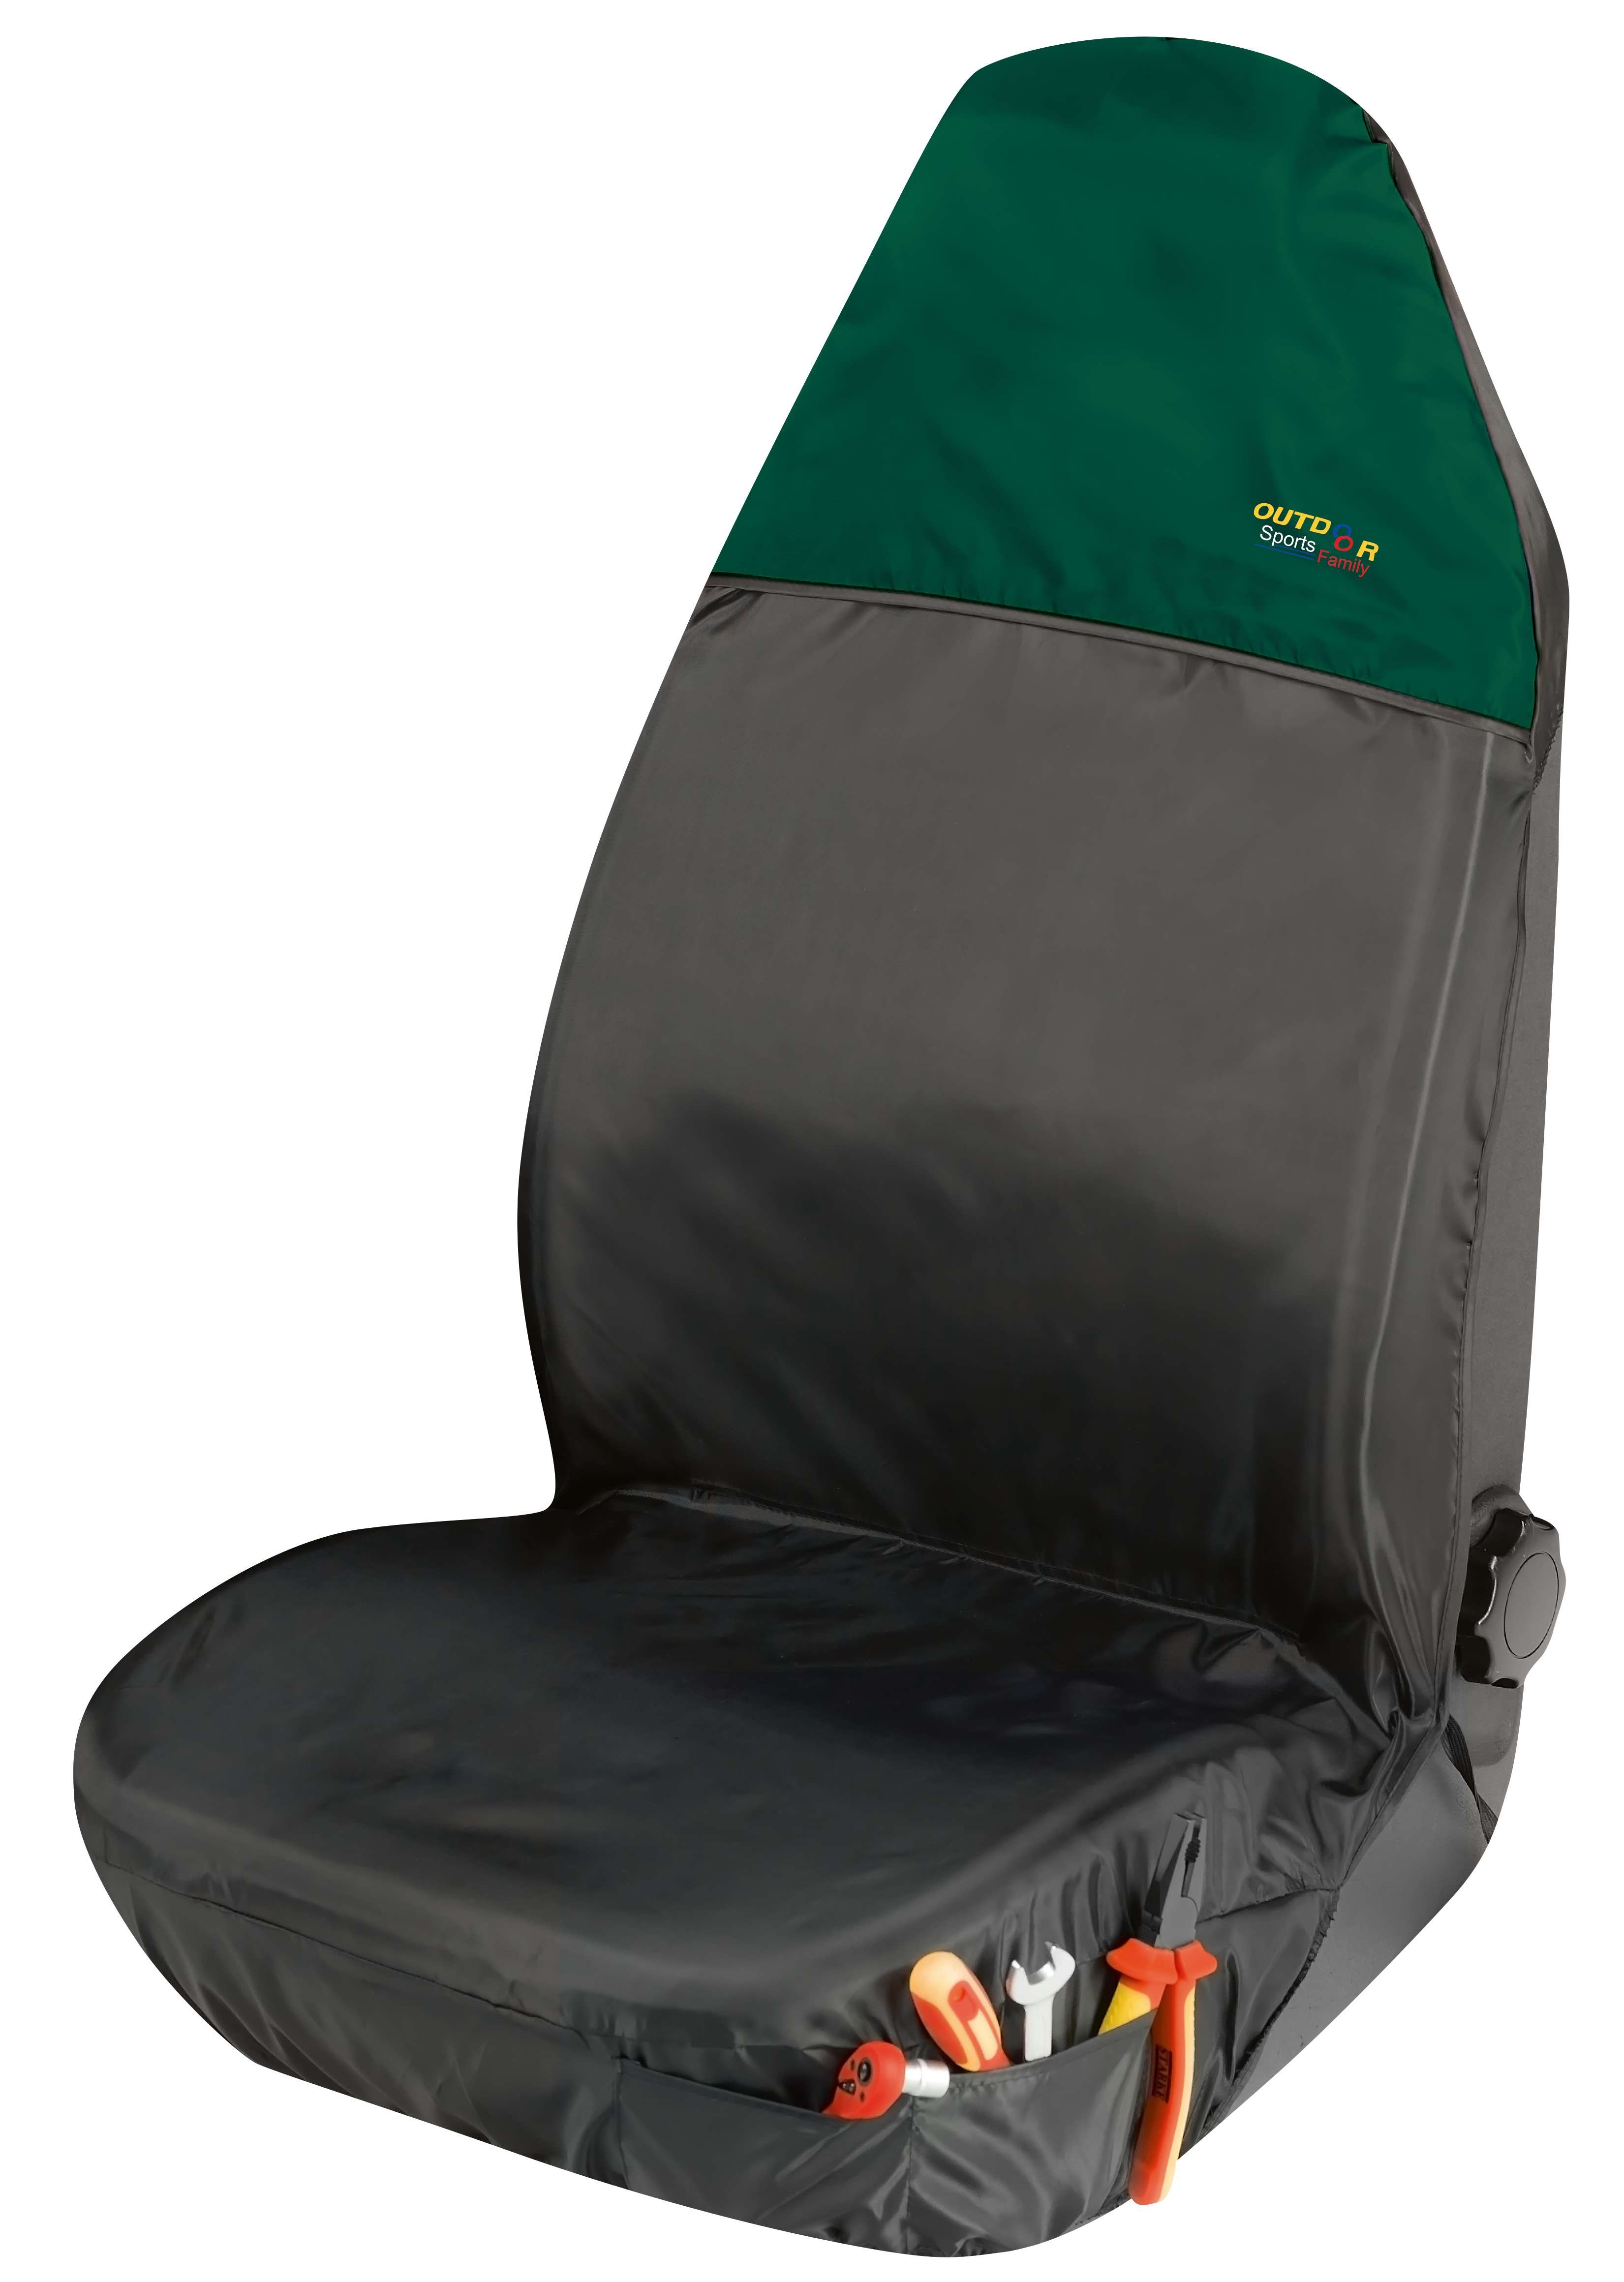 Outdoor Sports car Seat cover green